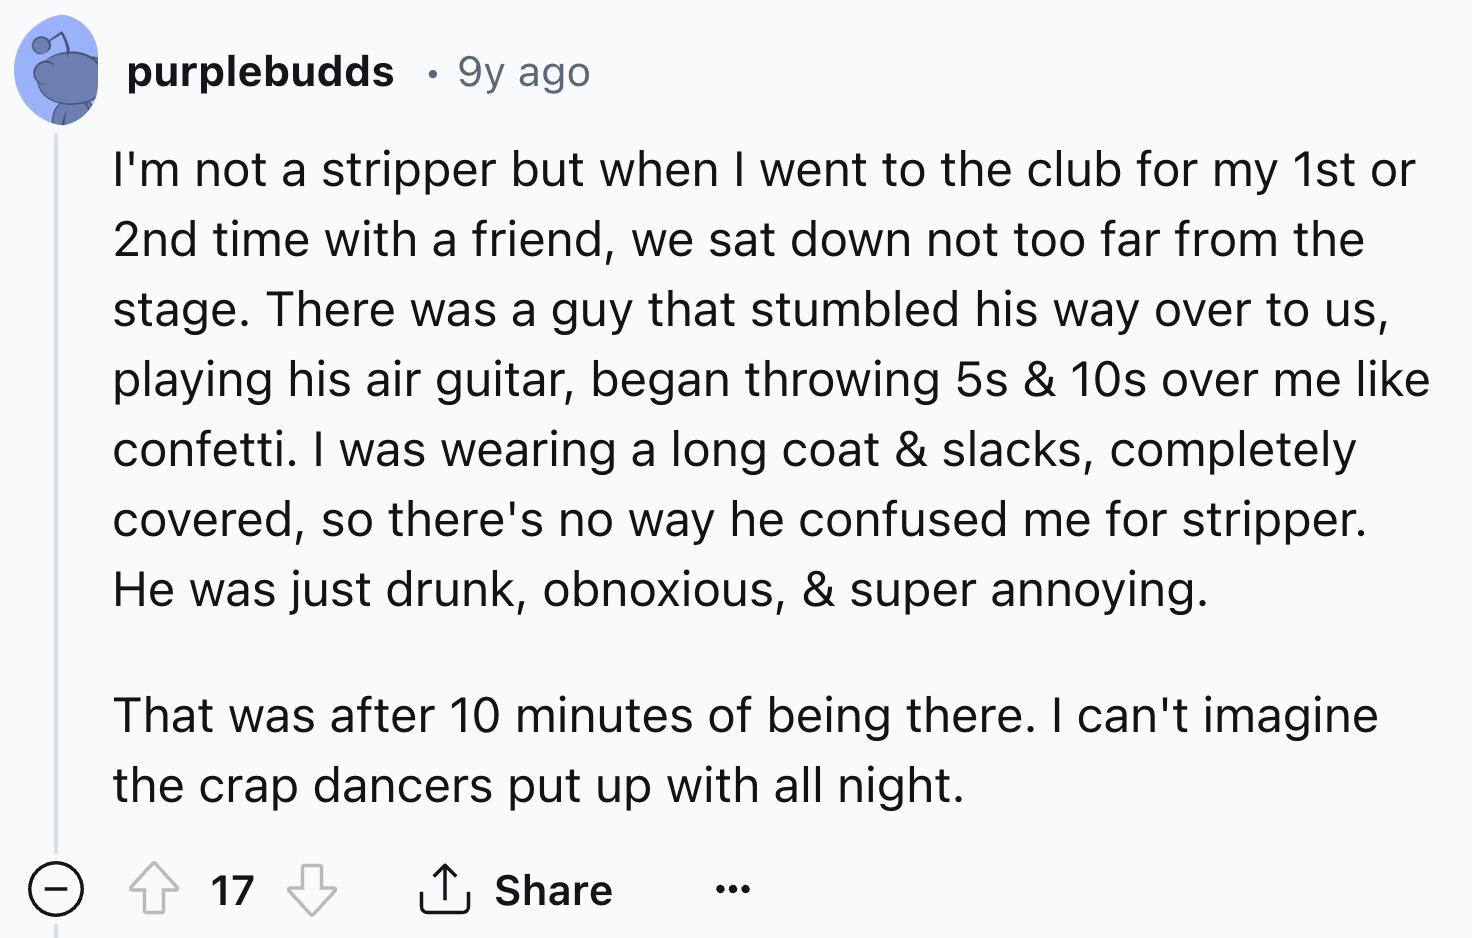 screenshot - purplebudds 9y ago I'm not a stripper but when I went to the club for my 1st or 2nd time with a friend, we sat down not too far from the stage. There was a guy that stumbled his way over to us, playing his air guitar, began throwing 5s & 10s 